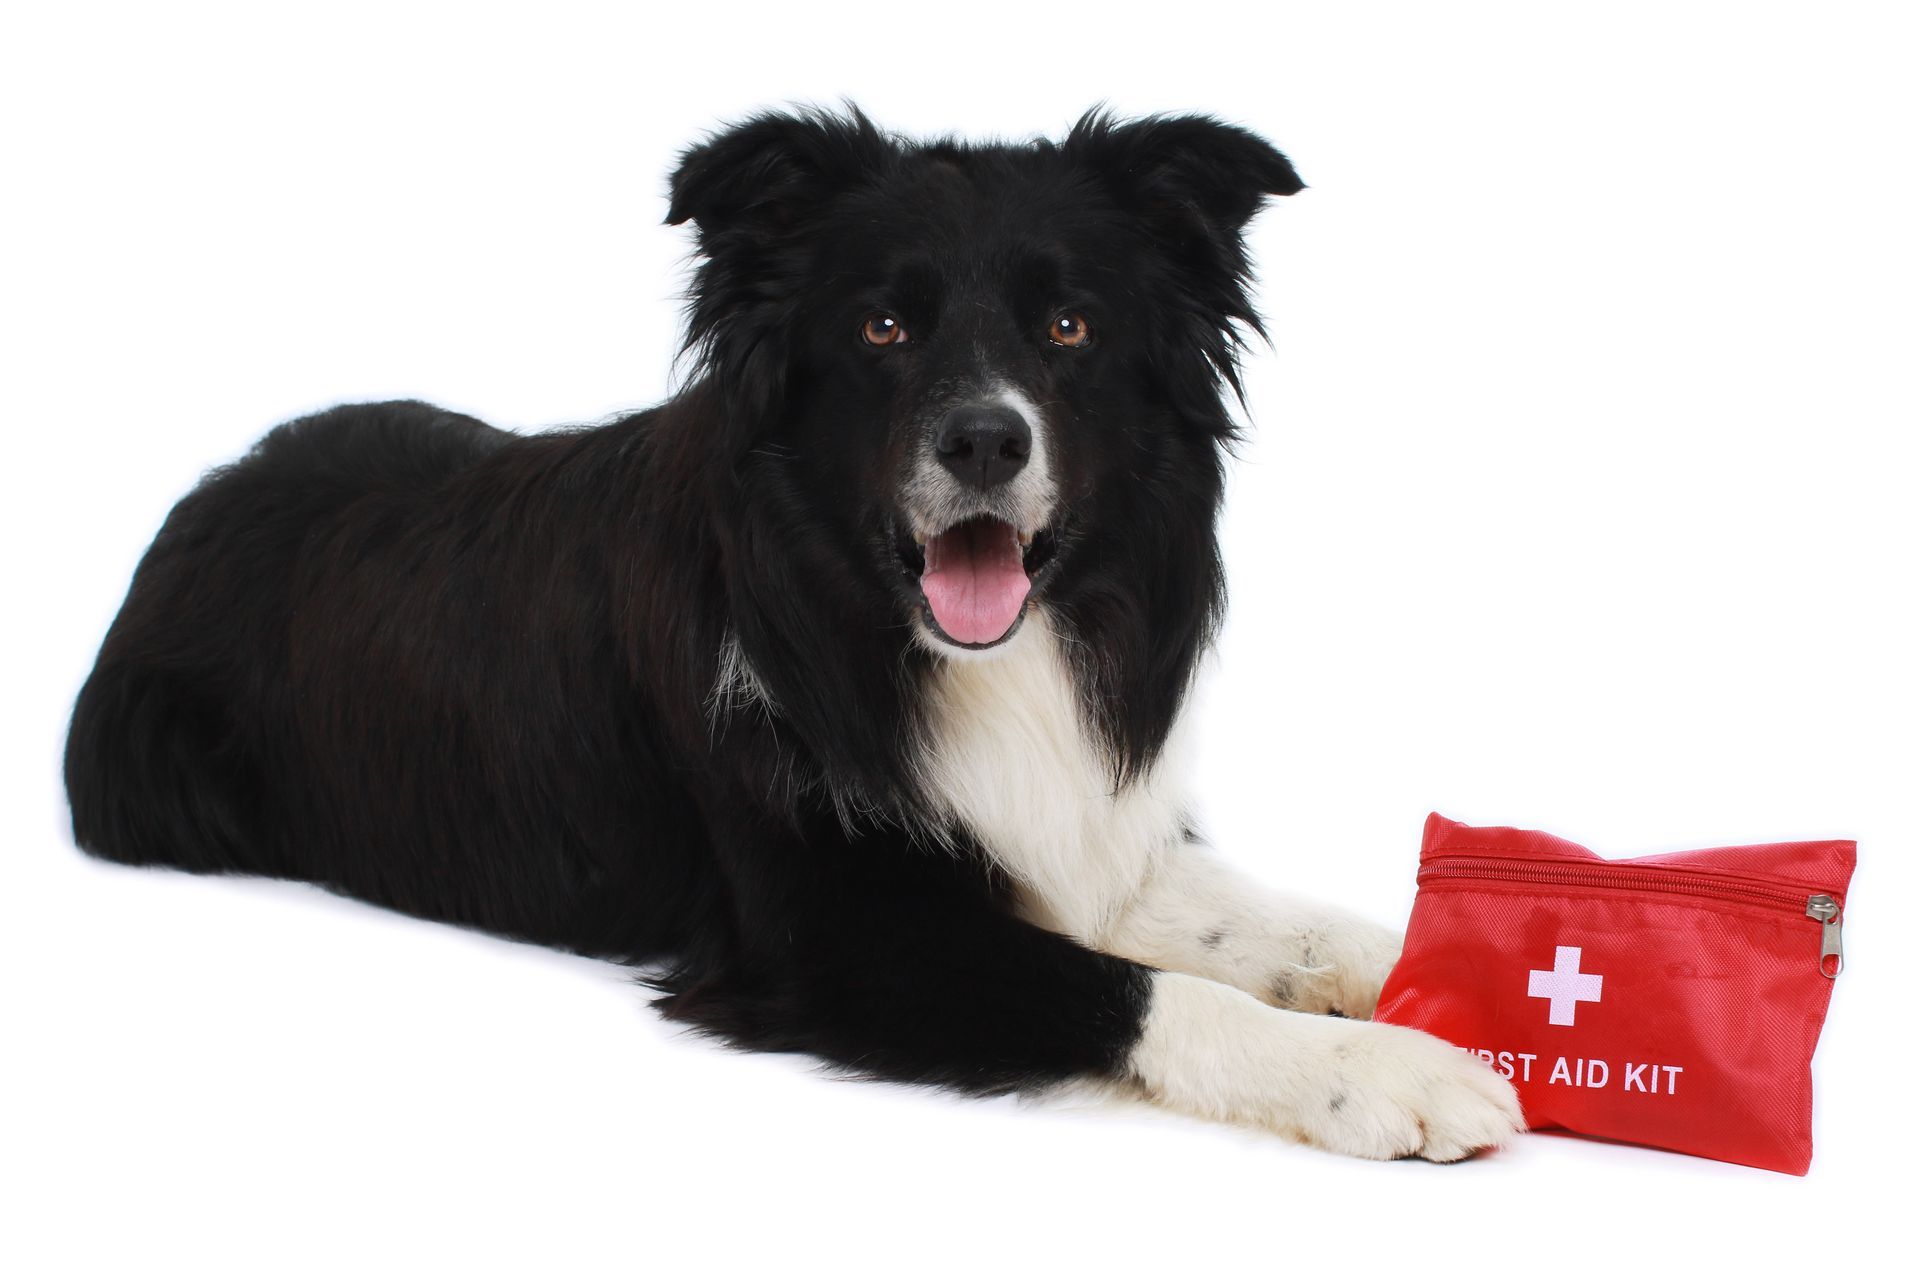 Dog with first Aid kit